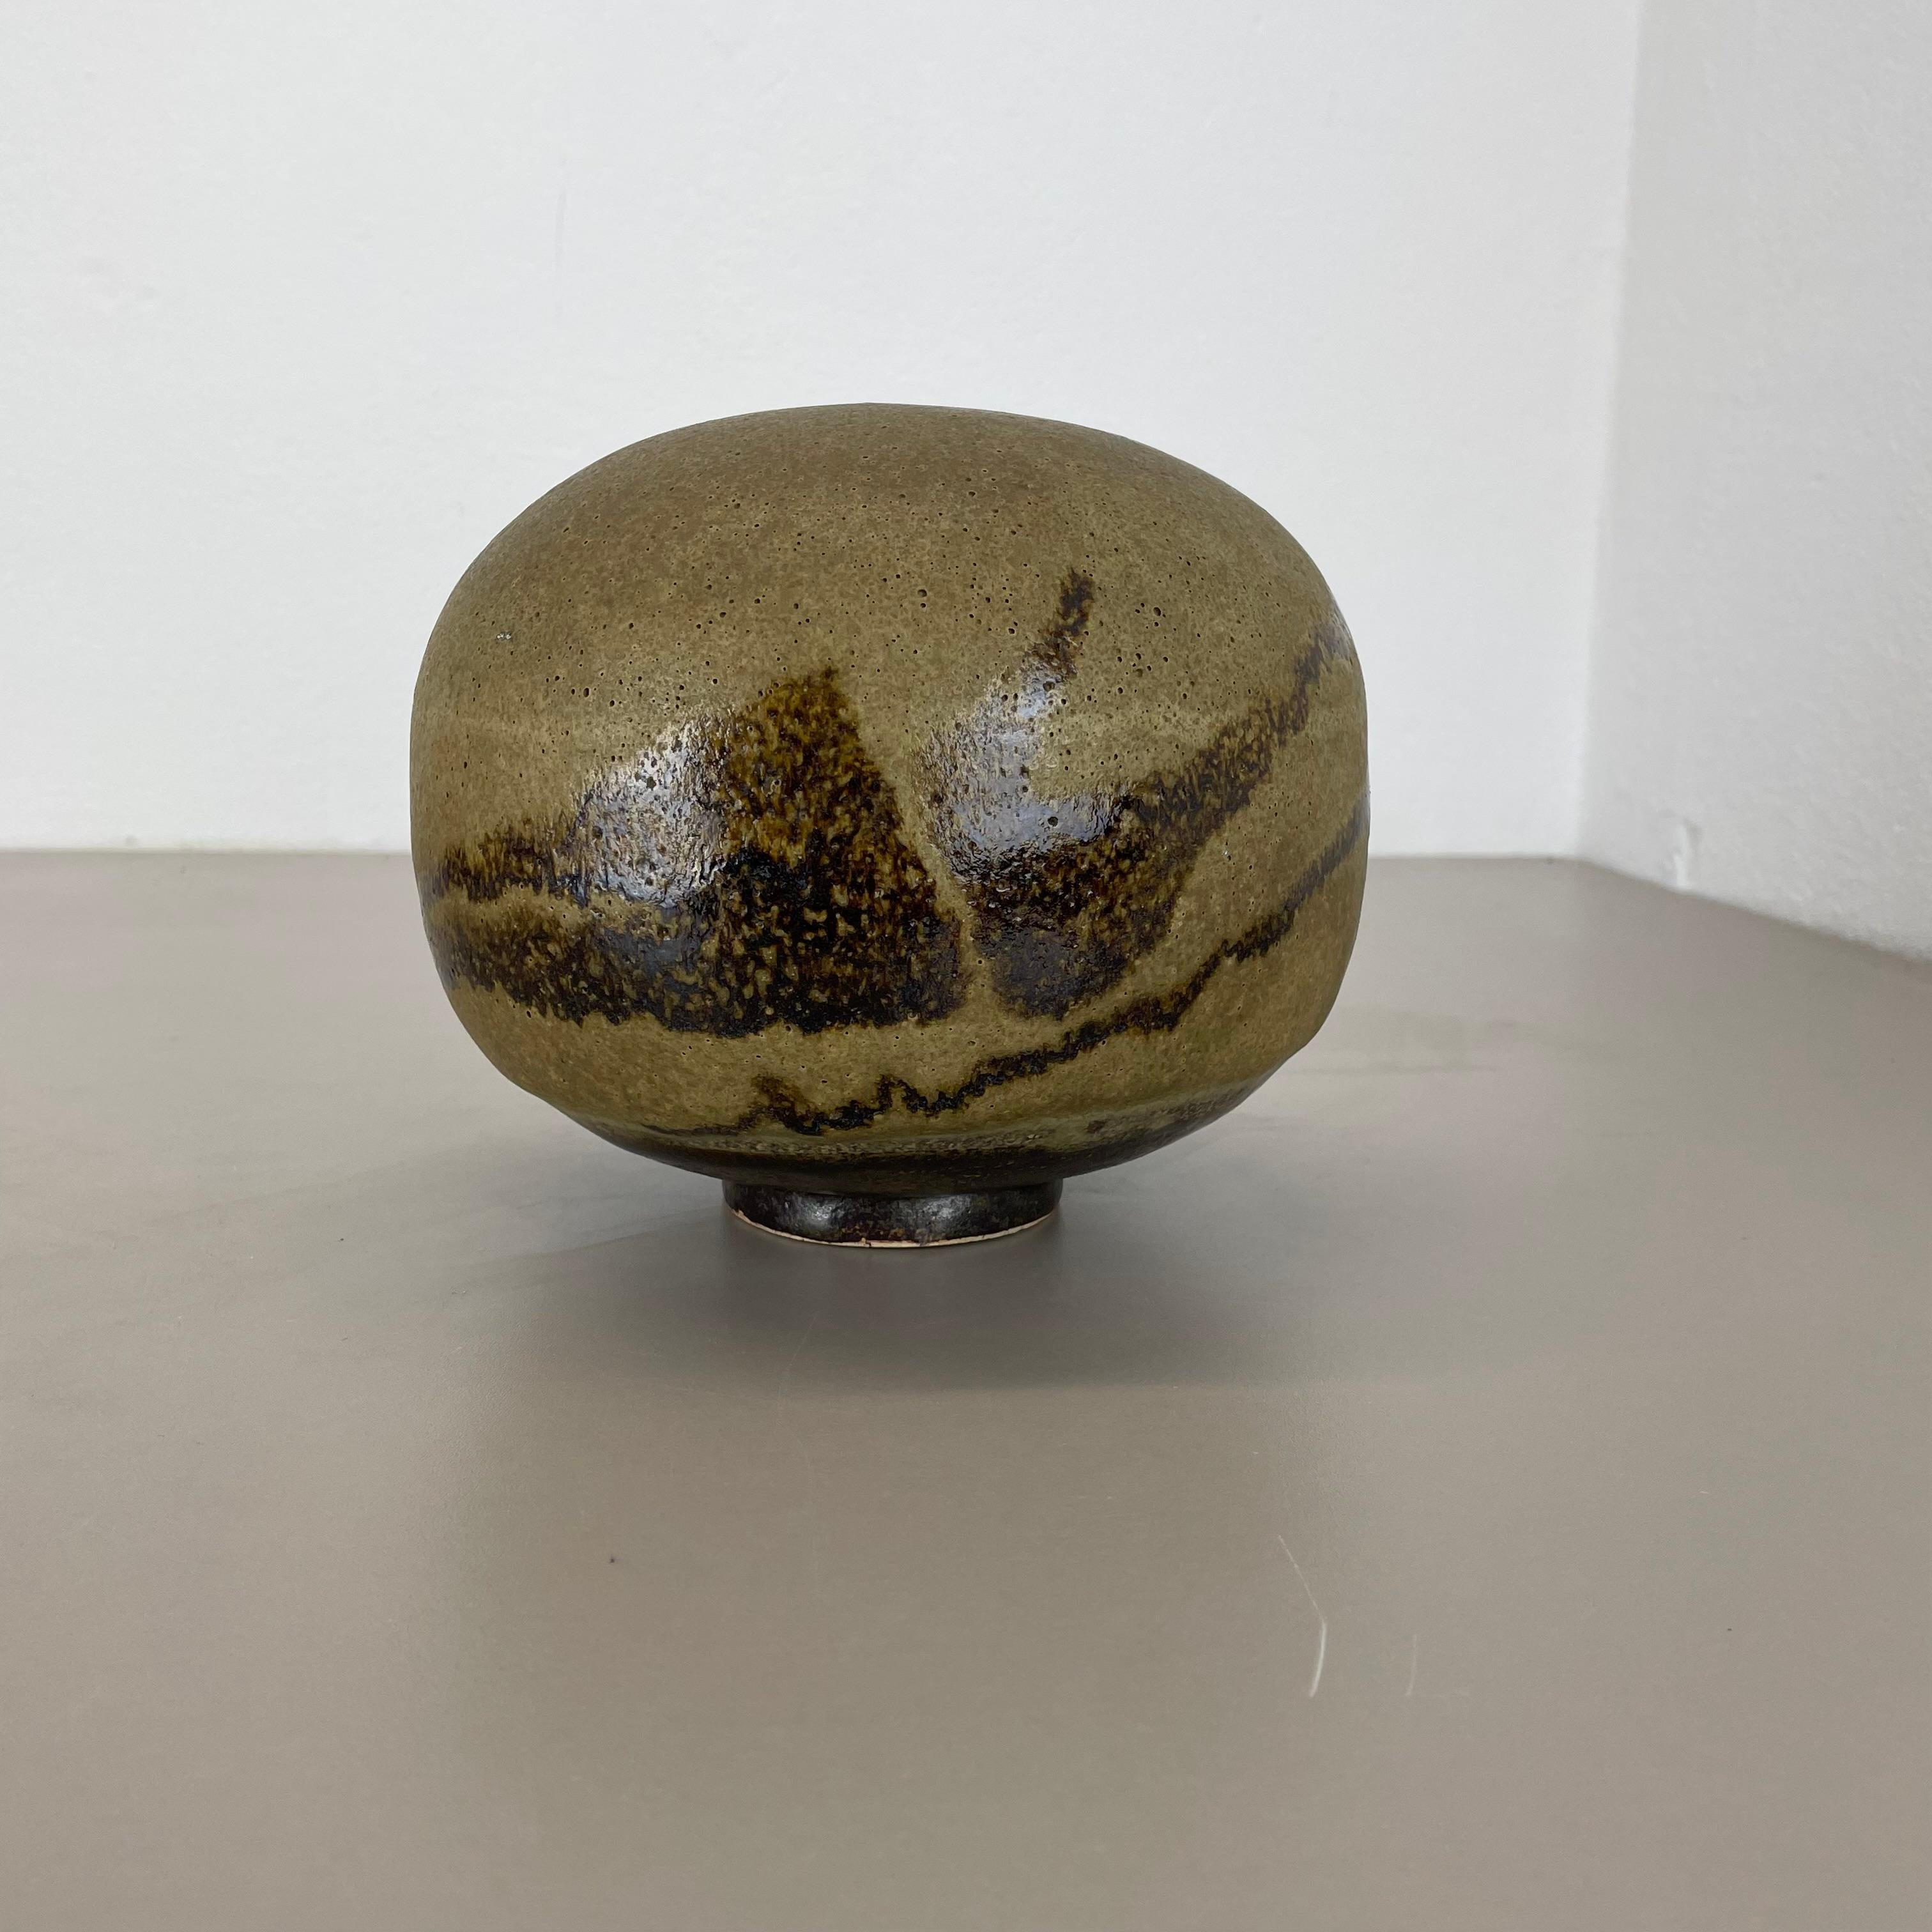 Large Sculptural Studio Pottery Vase Object by Dieter Crumbiegel, Germany, 1980s For Sale 2